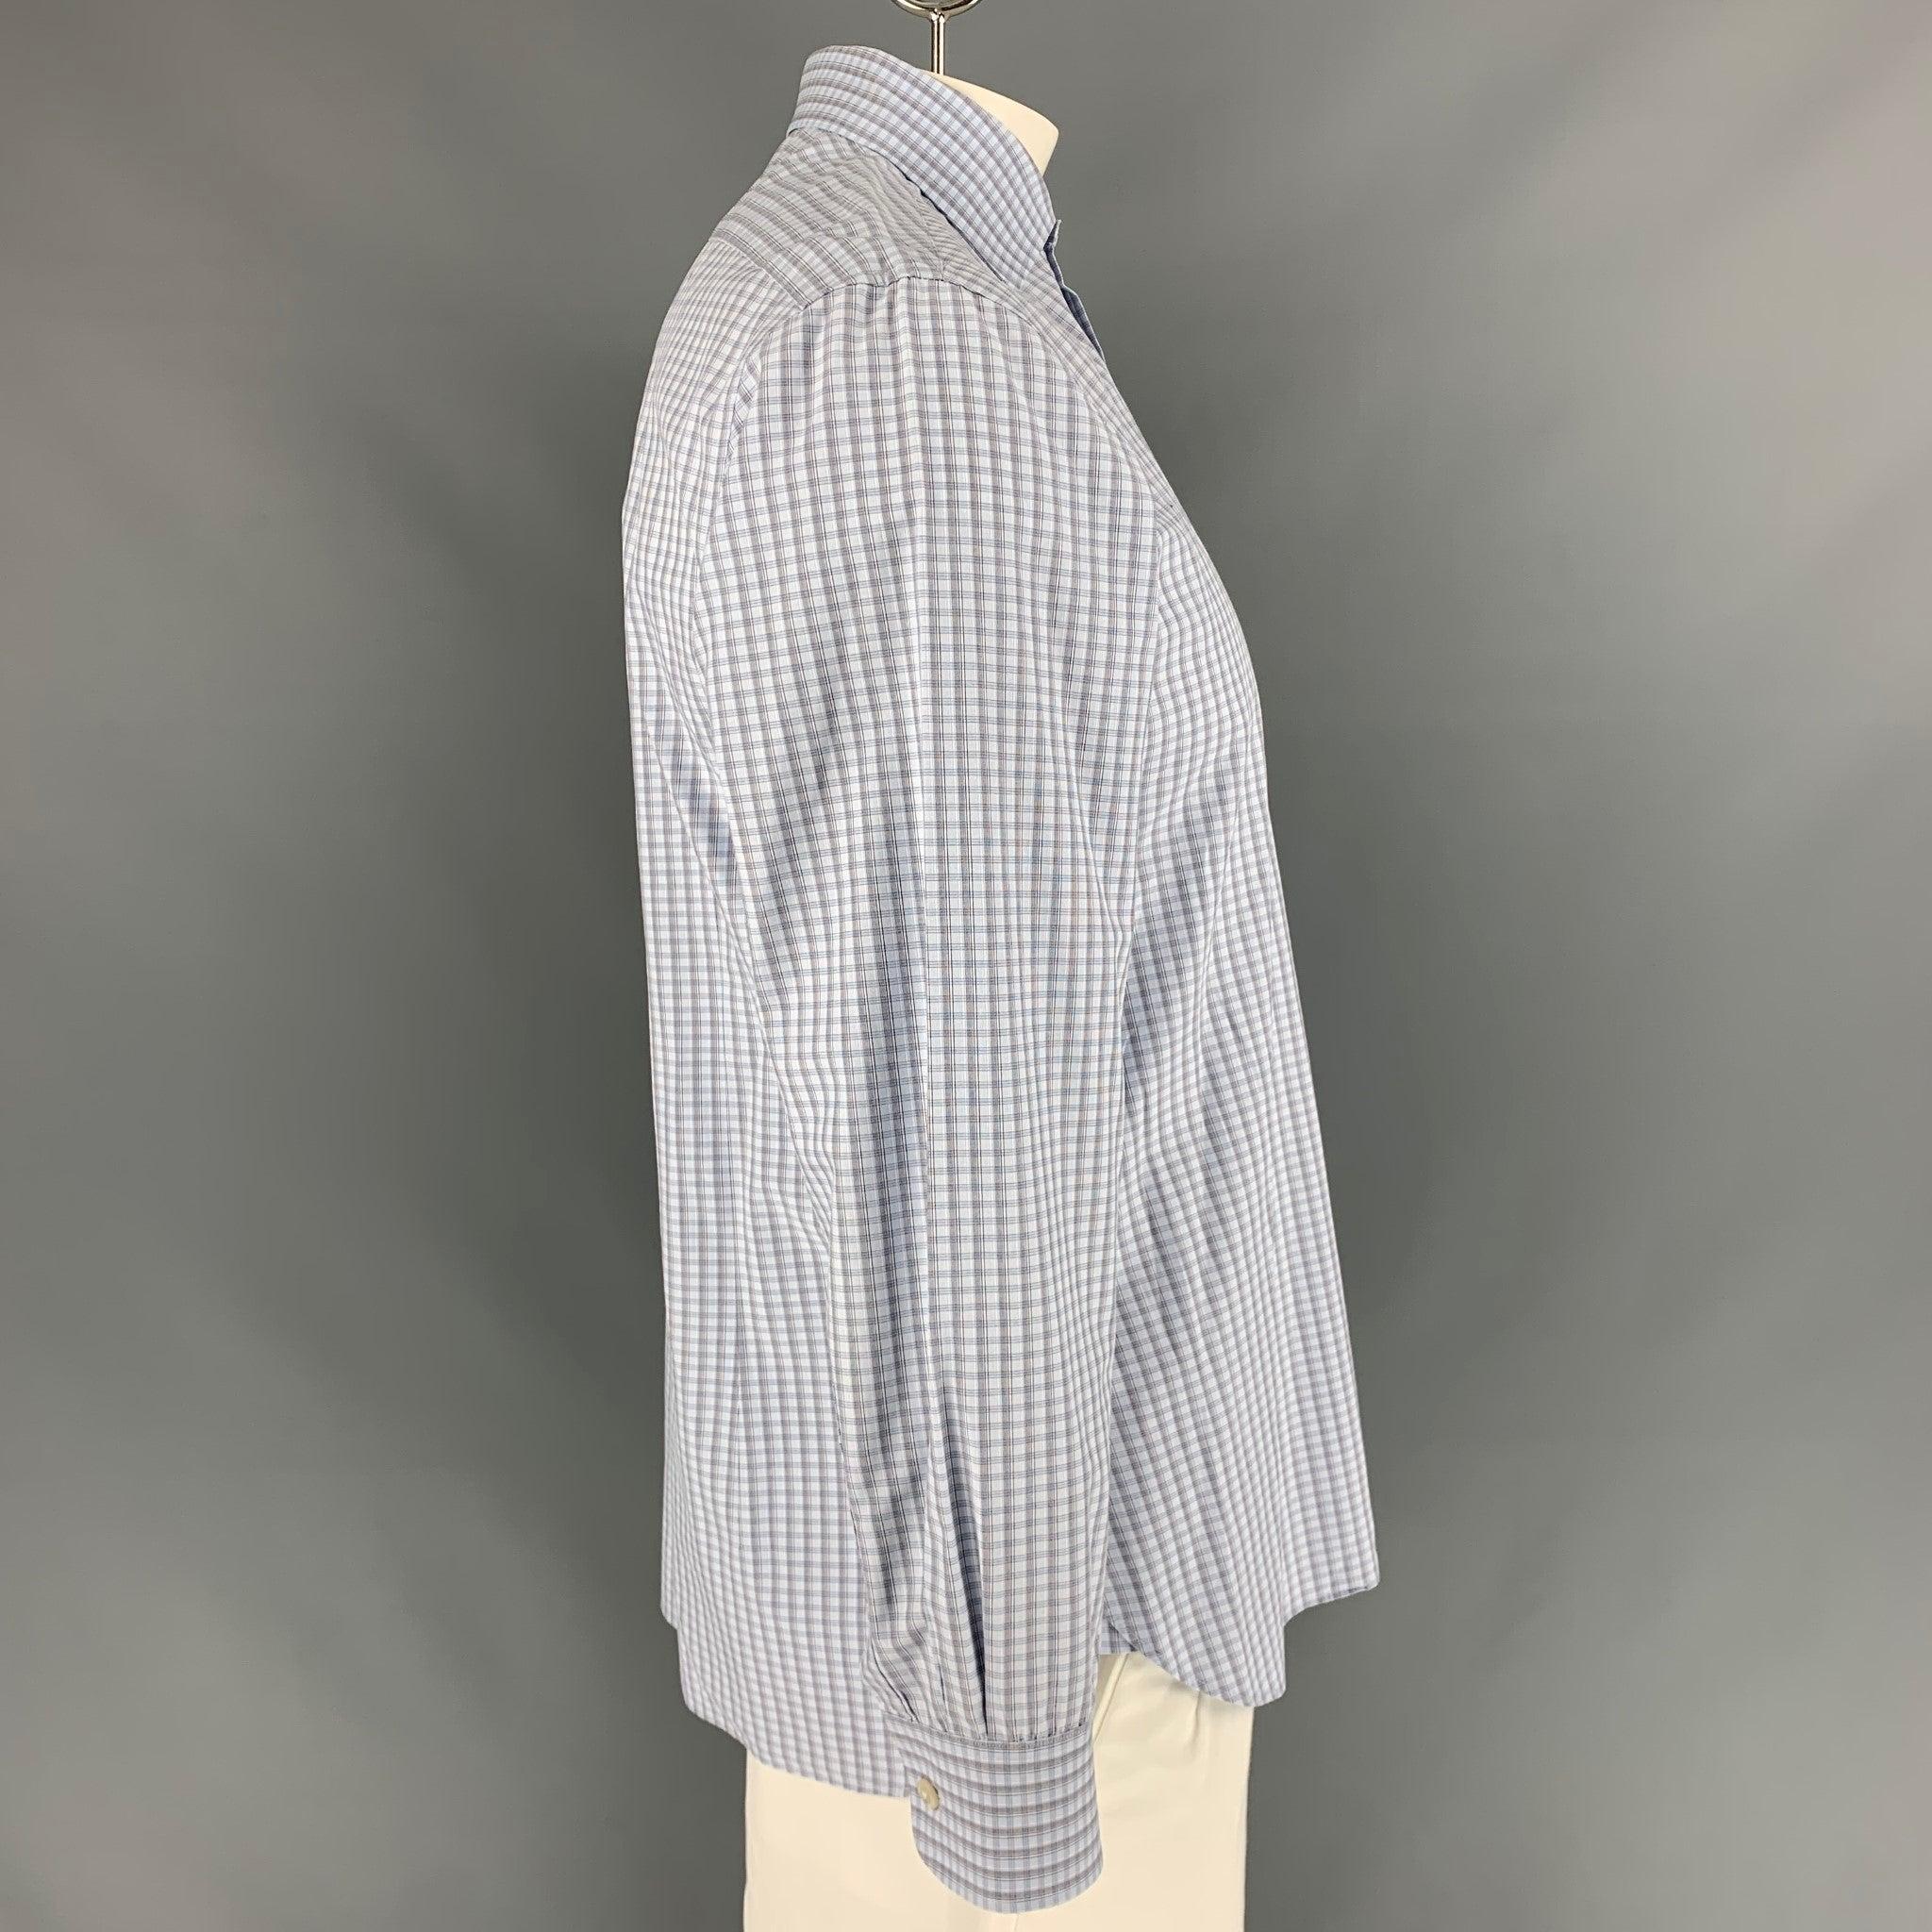 JOHN VARVATOS 'Slim Fit' Long sleeve shirt comes in blue and grey plaid cotton featuring a cutaway collar, one round cuff, and button up closure. Very Good Pre-Owned Condition. Fabric Tag Removed. 

Marked:   32/33-16.5 

Measurements: 
 
Shoulder: